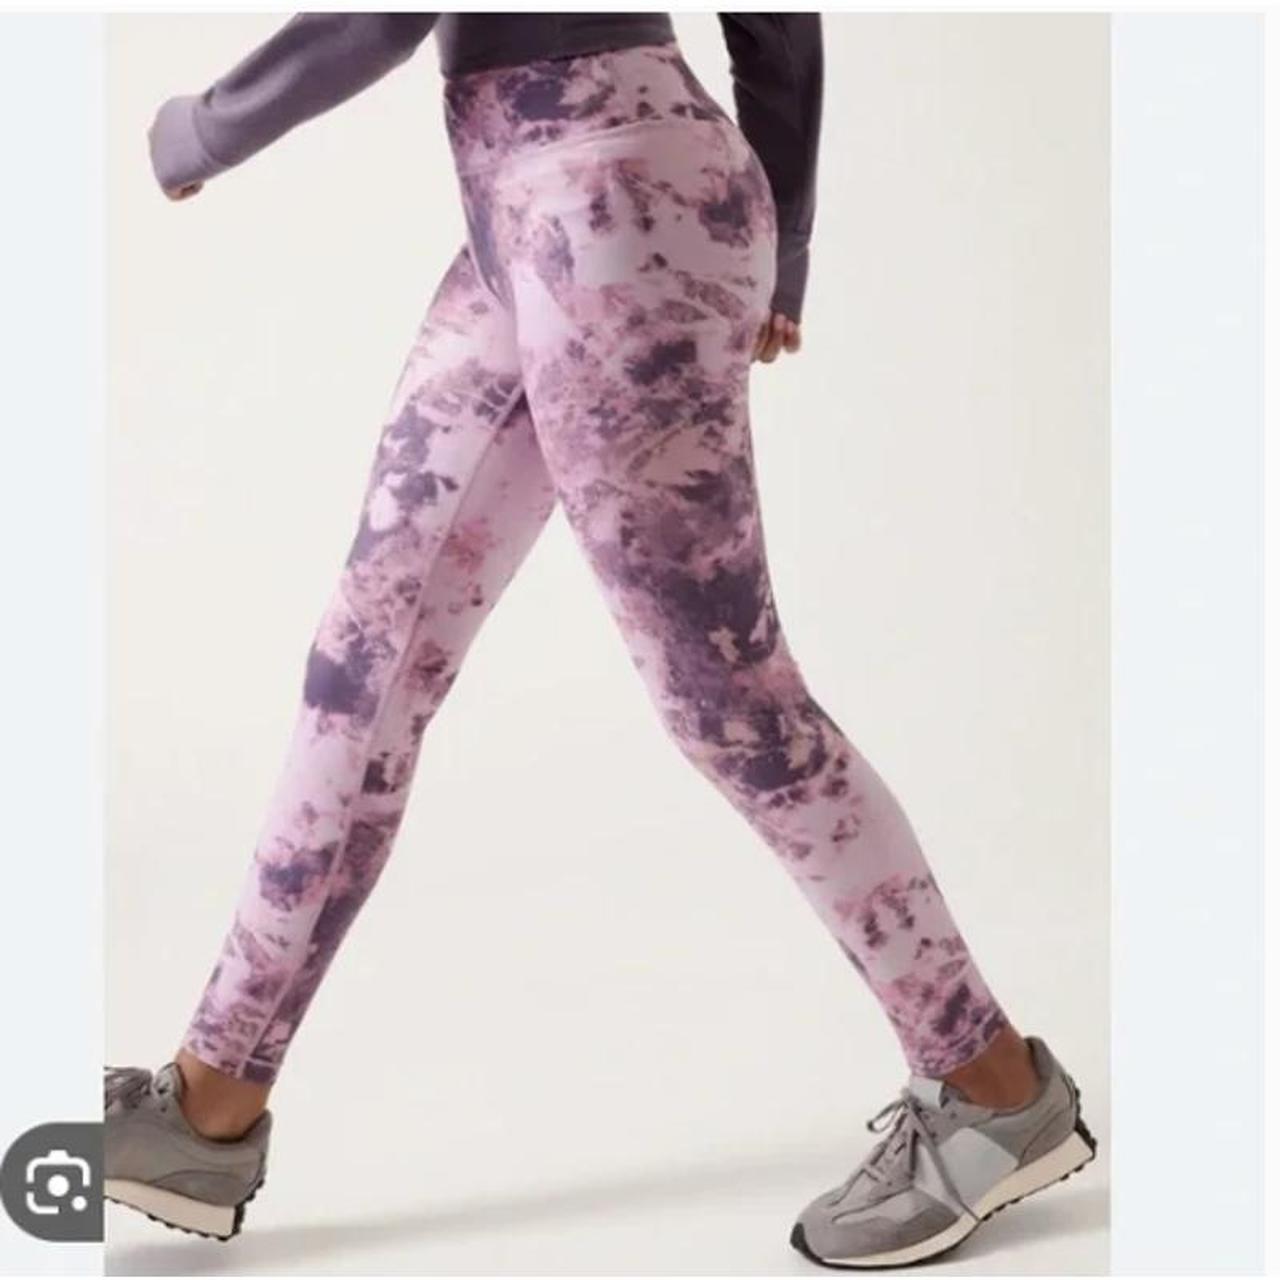 Athleta Girl's High Rise Printed Chit Chat Tight - Depop